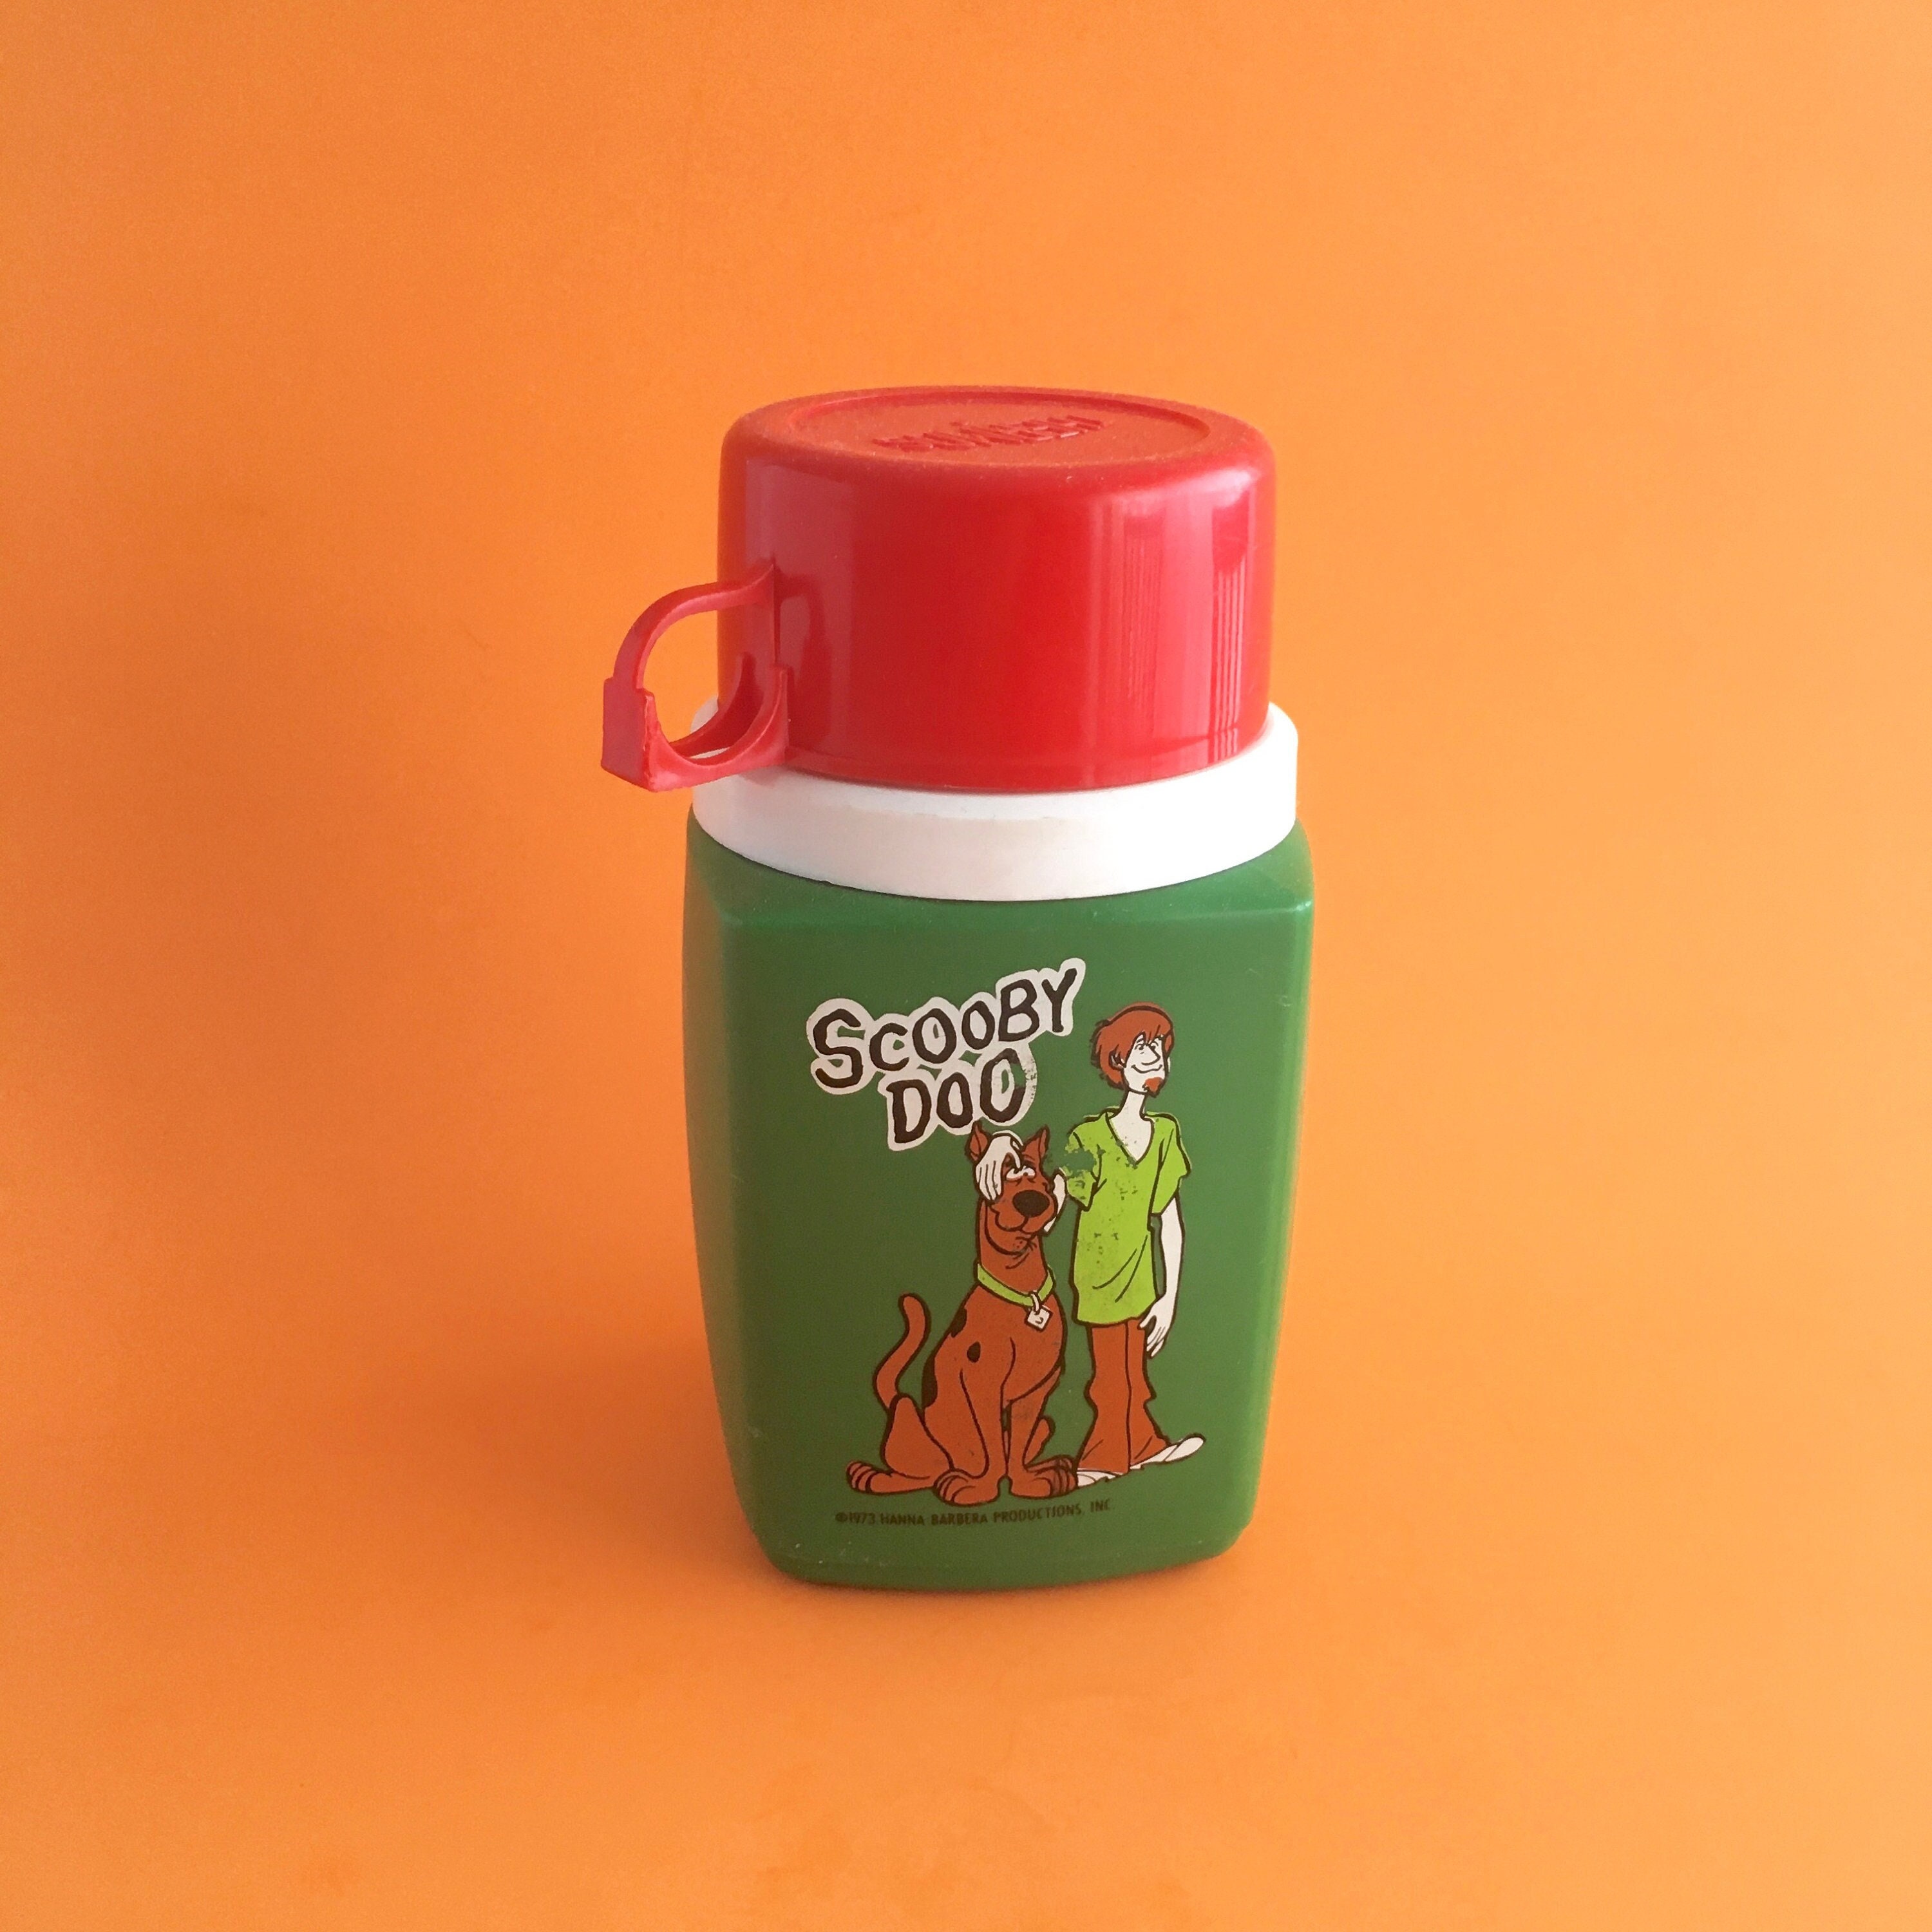 New Scooby Doo Lunchbox Thermos And More Inside By Hanna-Barbera